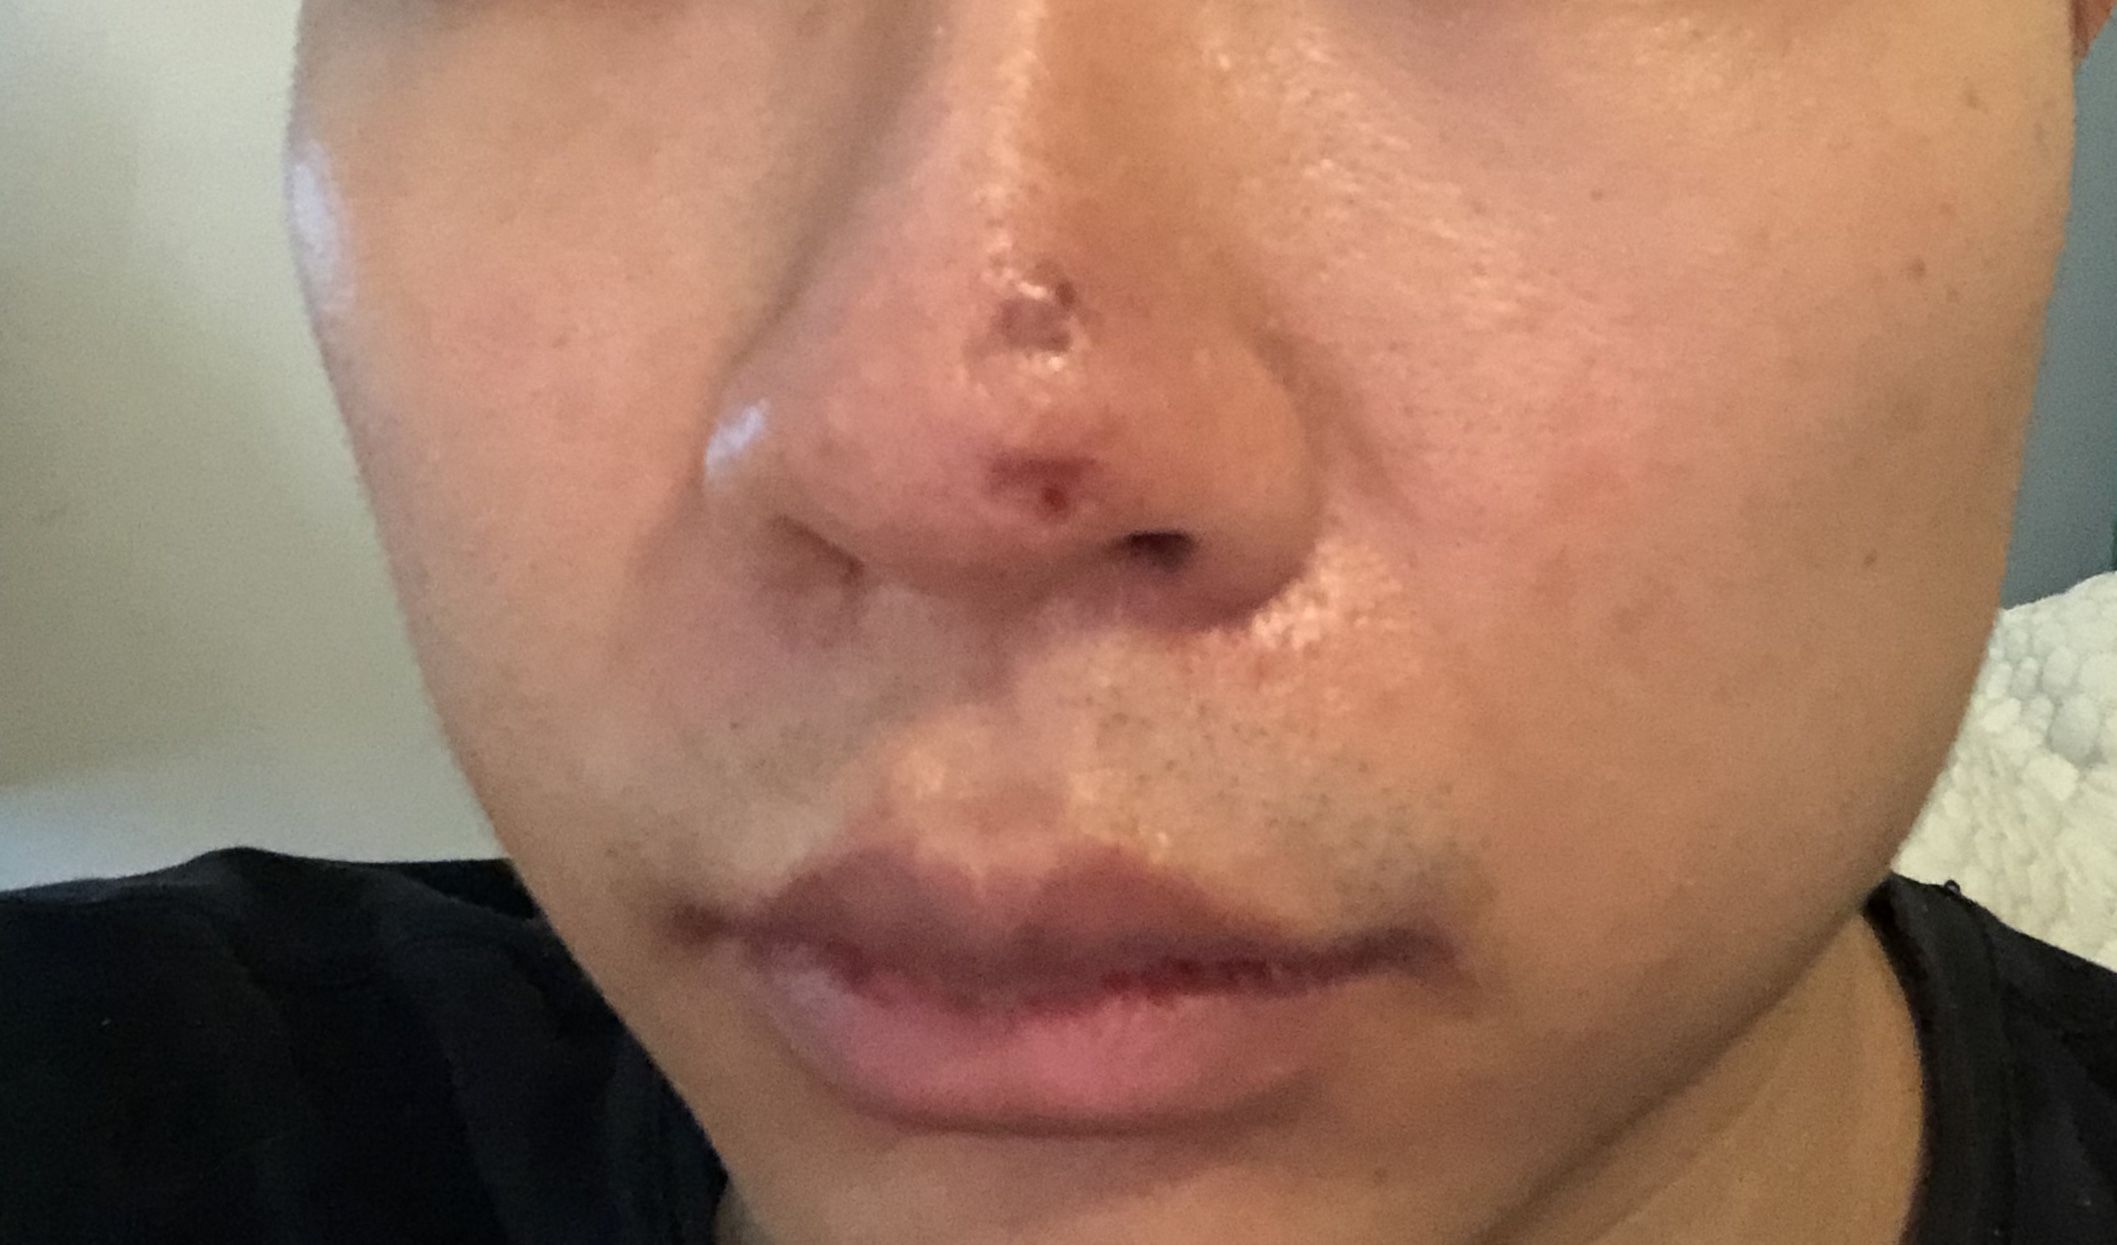 Acne Treatment - How Do I Tell It's Going?